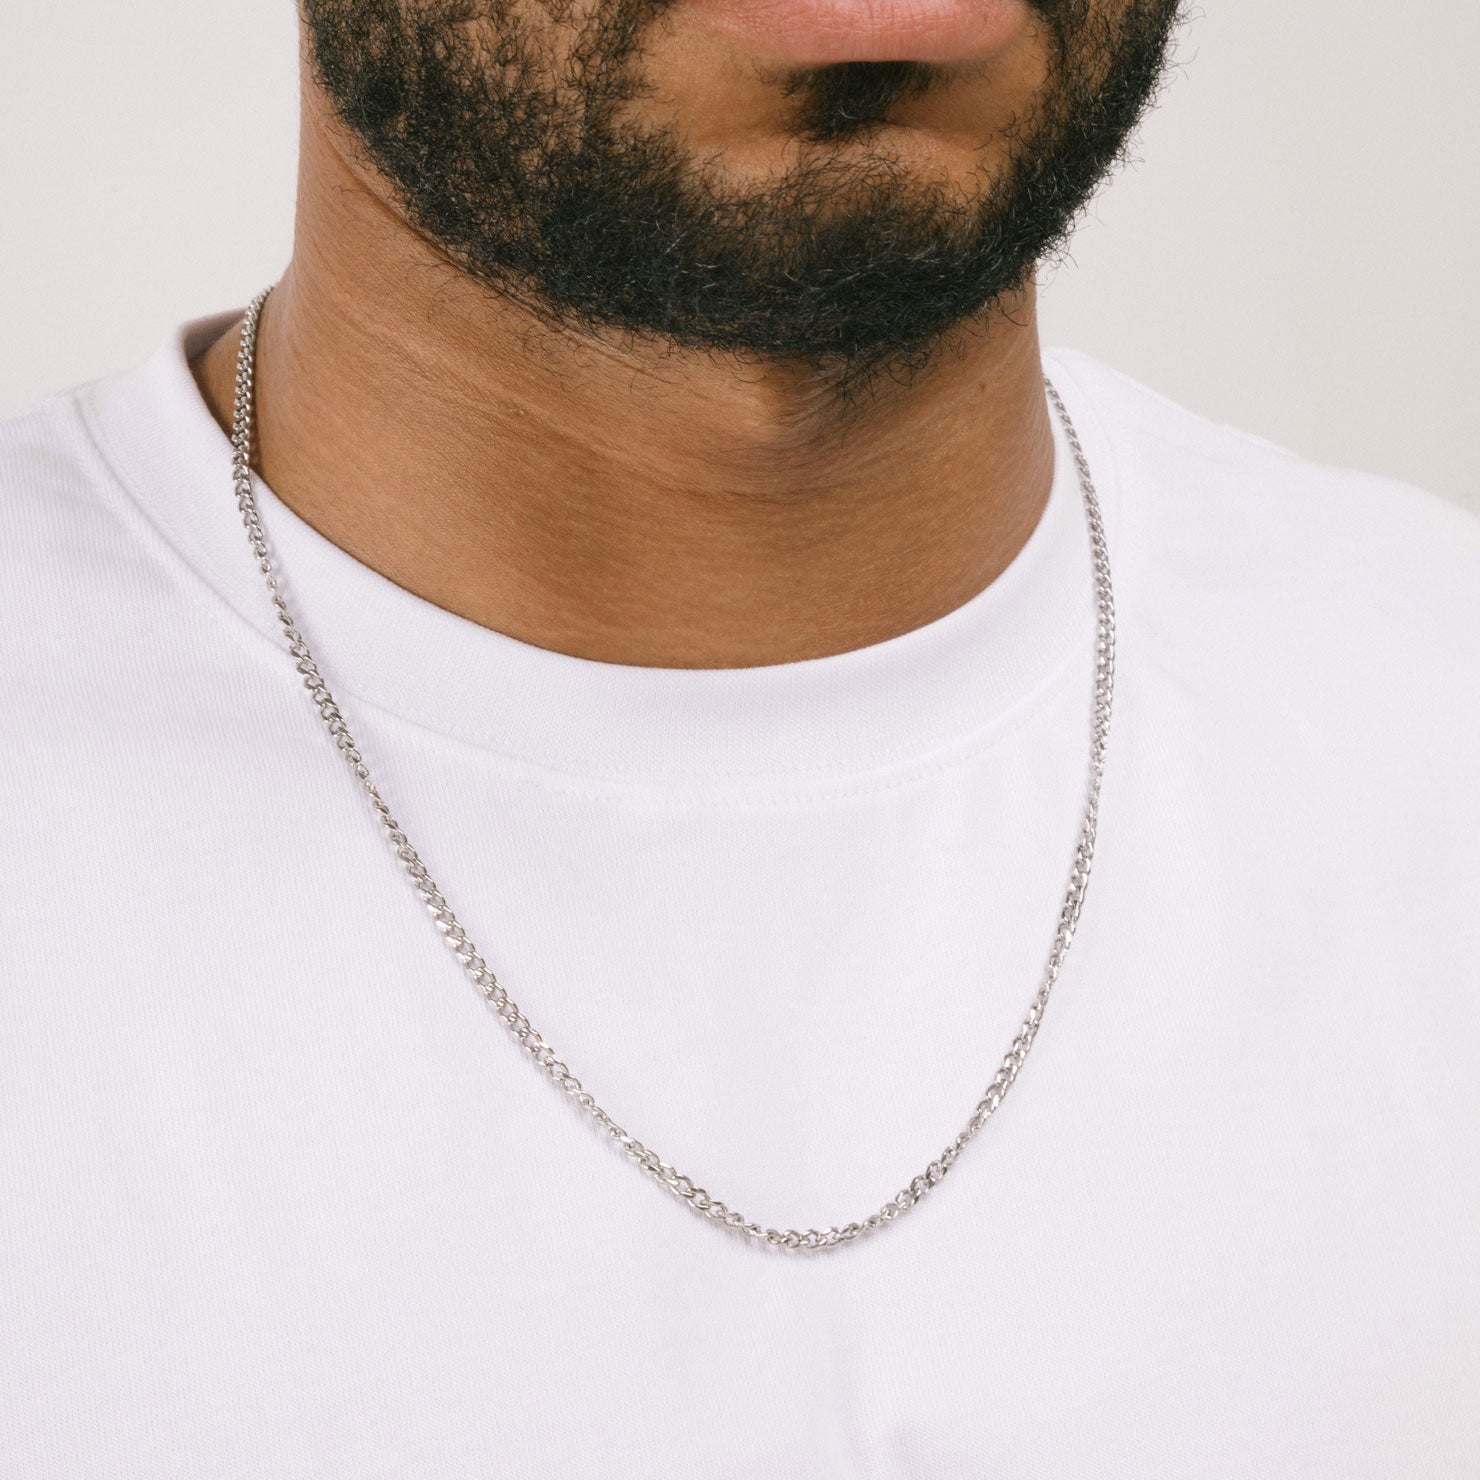 A model wearing the Cuban Chain in Silver is crafted from Stainless Steel material and is non-tarnish, water-resistant, and designed to be hypoallergenic.